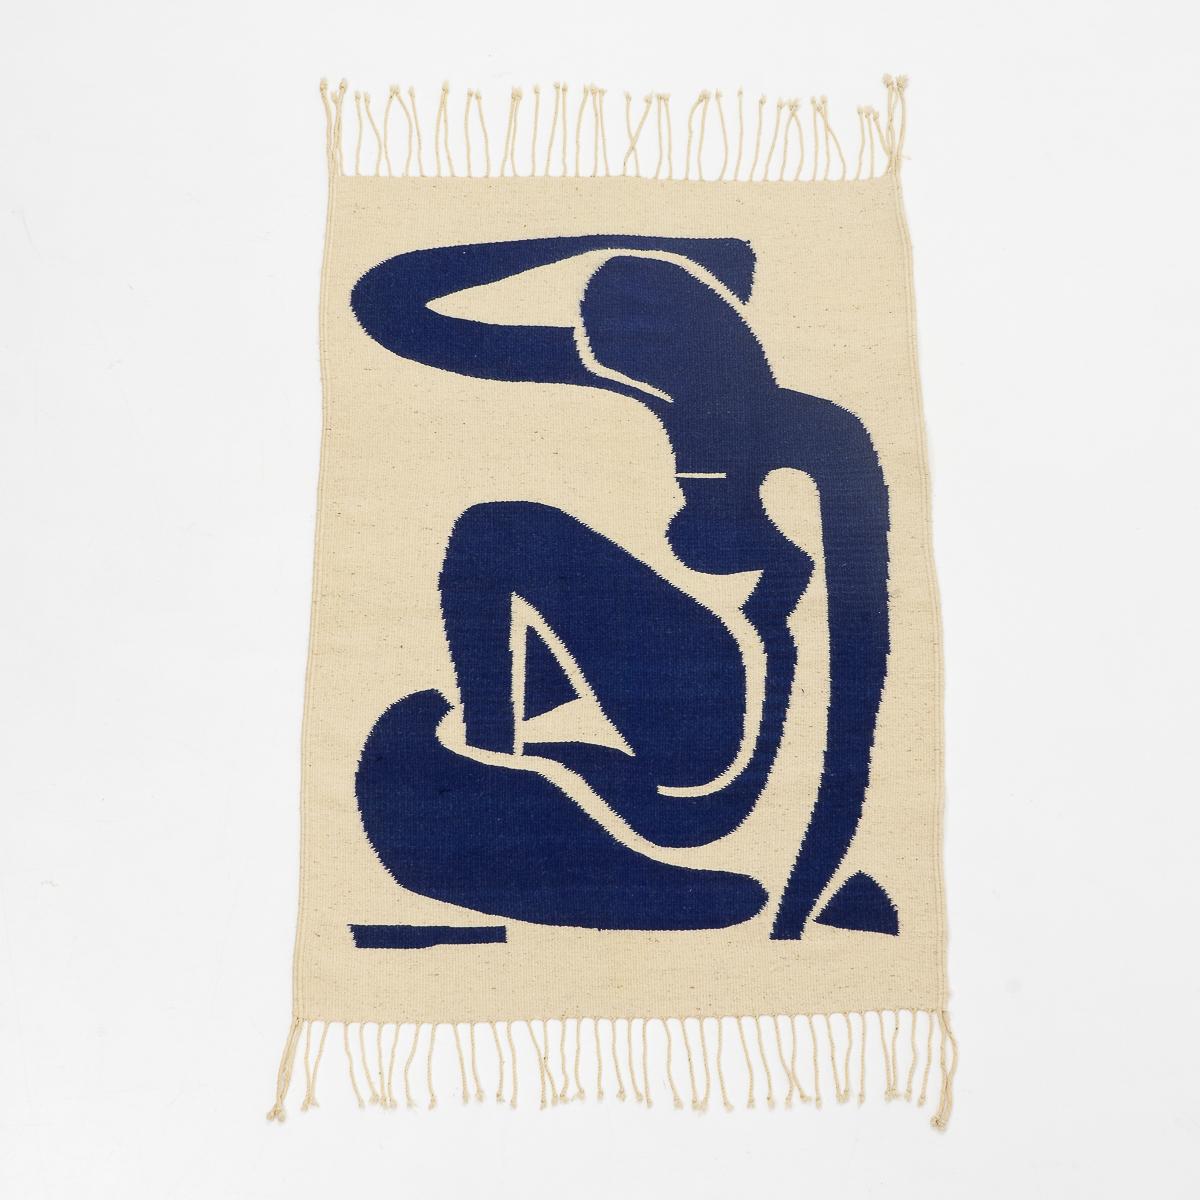 Tapestry Blue Nude, inspired Matisse, 1980s 1